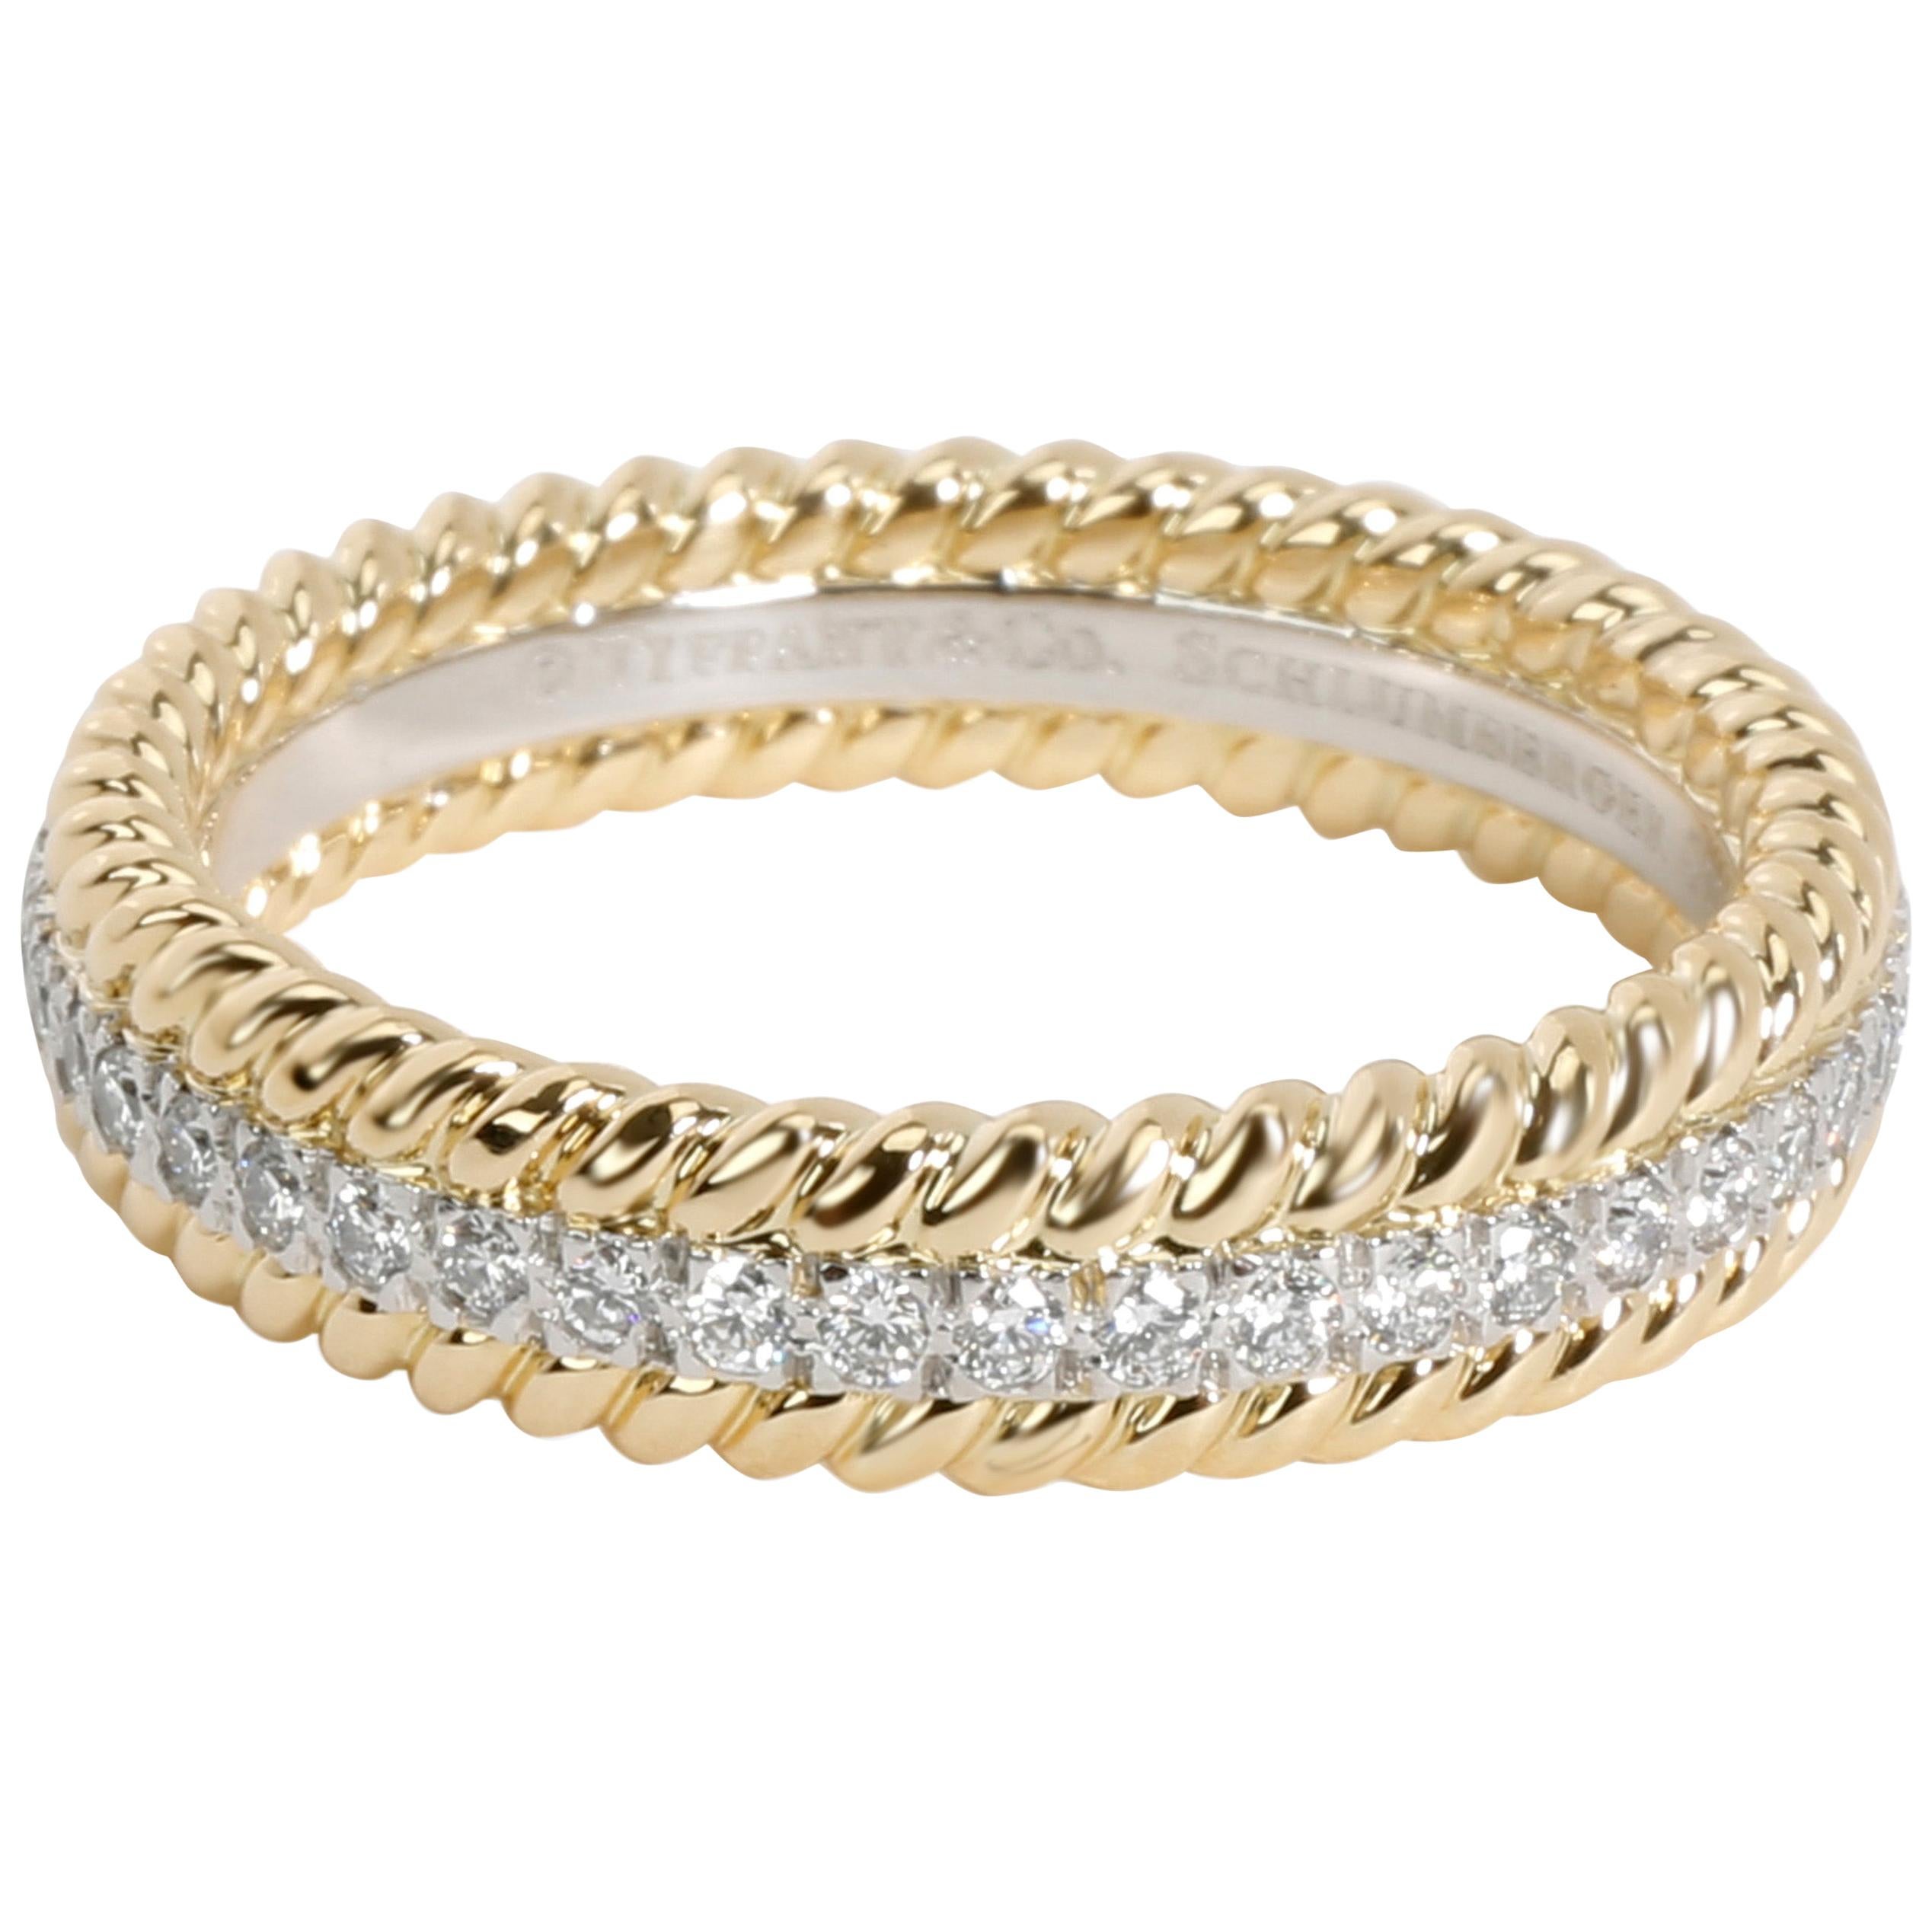 Tiffany & Co. Schlumberger Rope Two-Row Diamond Ring in 18Kt Yellow Gold 0.23ctw